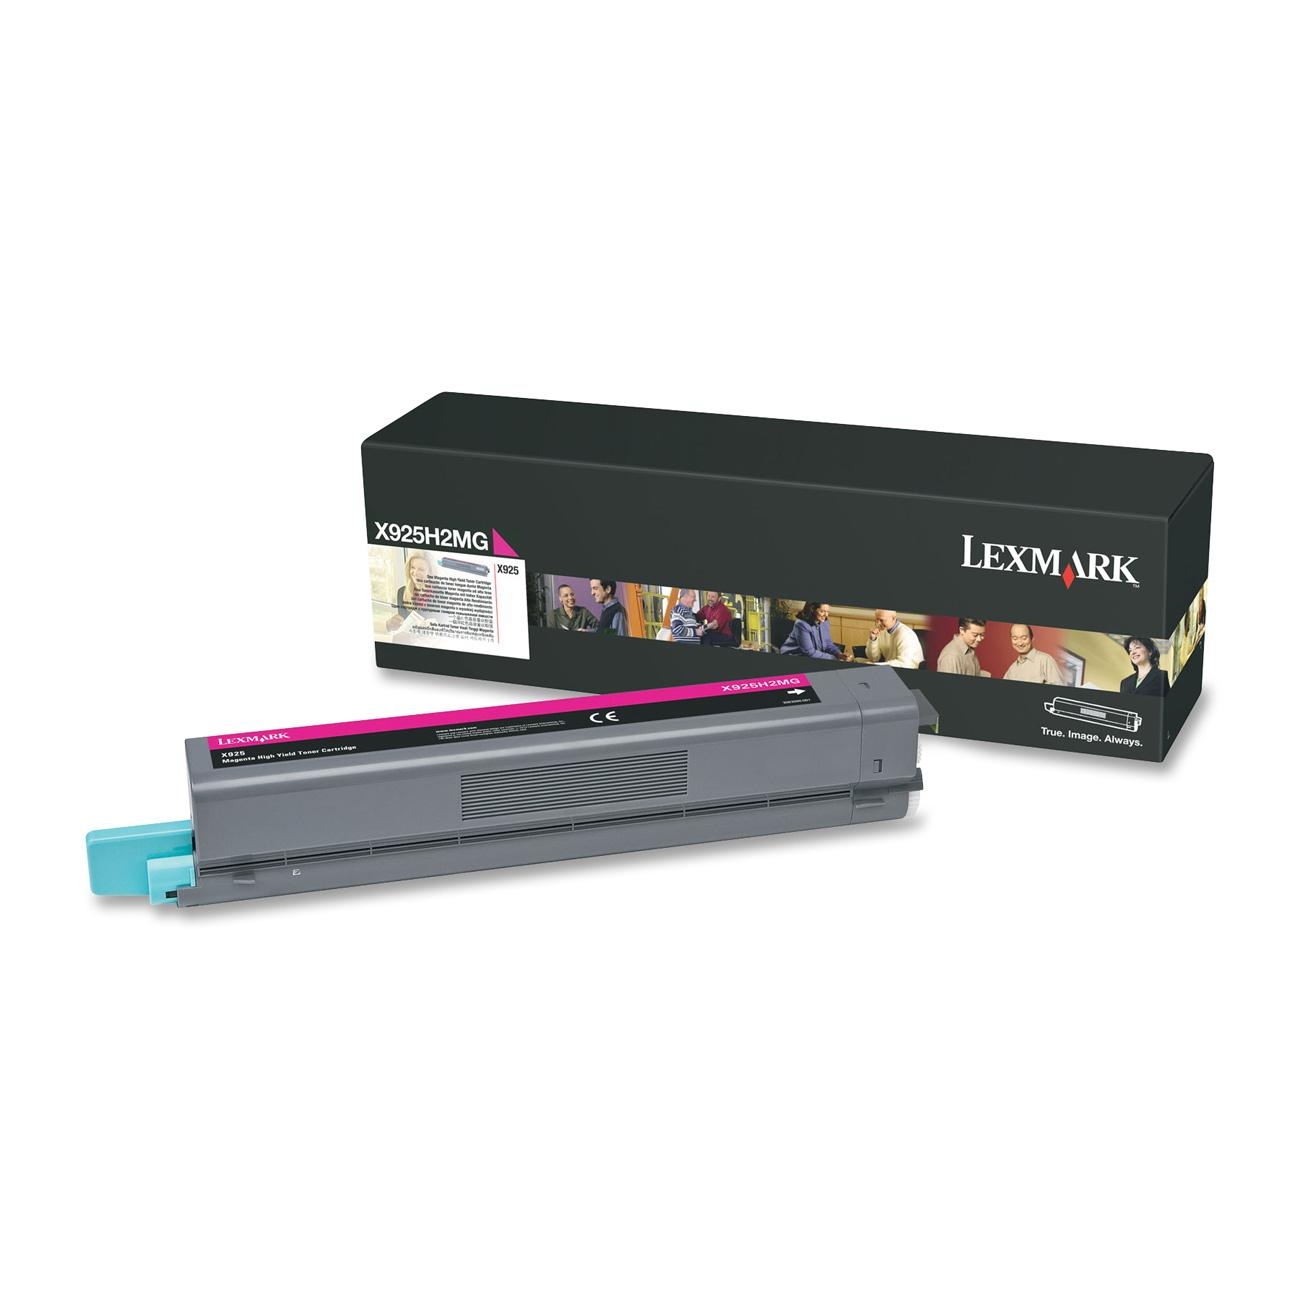 LEXMARK X925H2MG MAGENTA TONER YIELD 7500 PAGES FOR X925